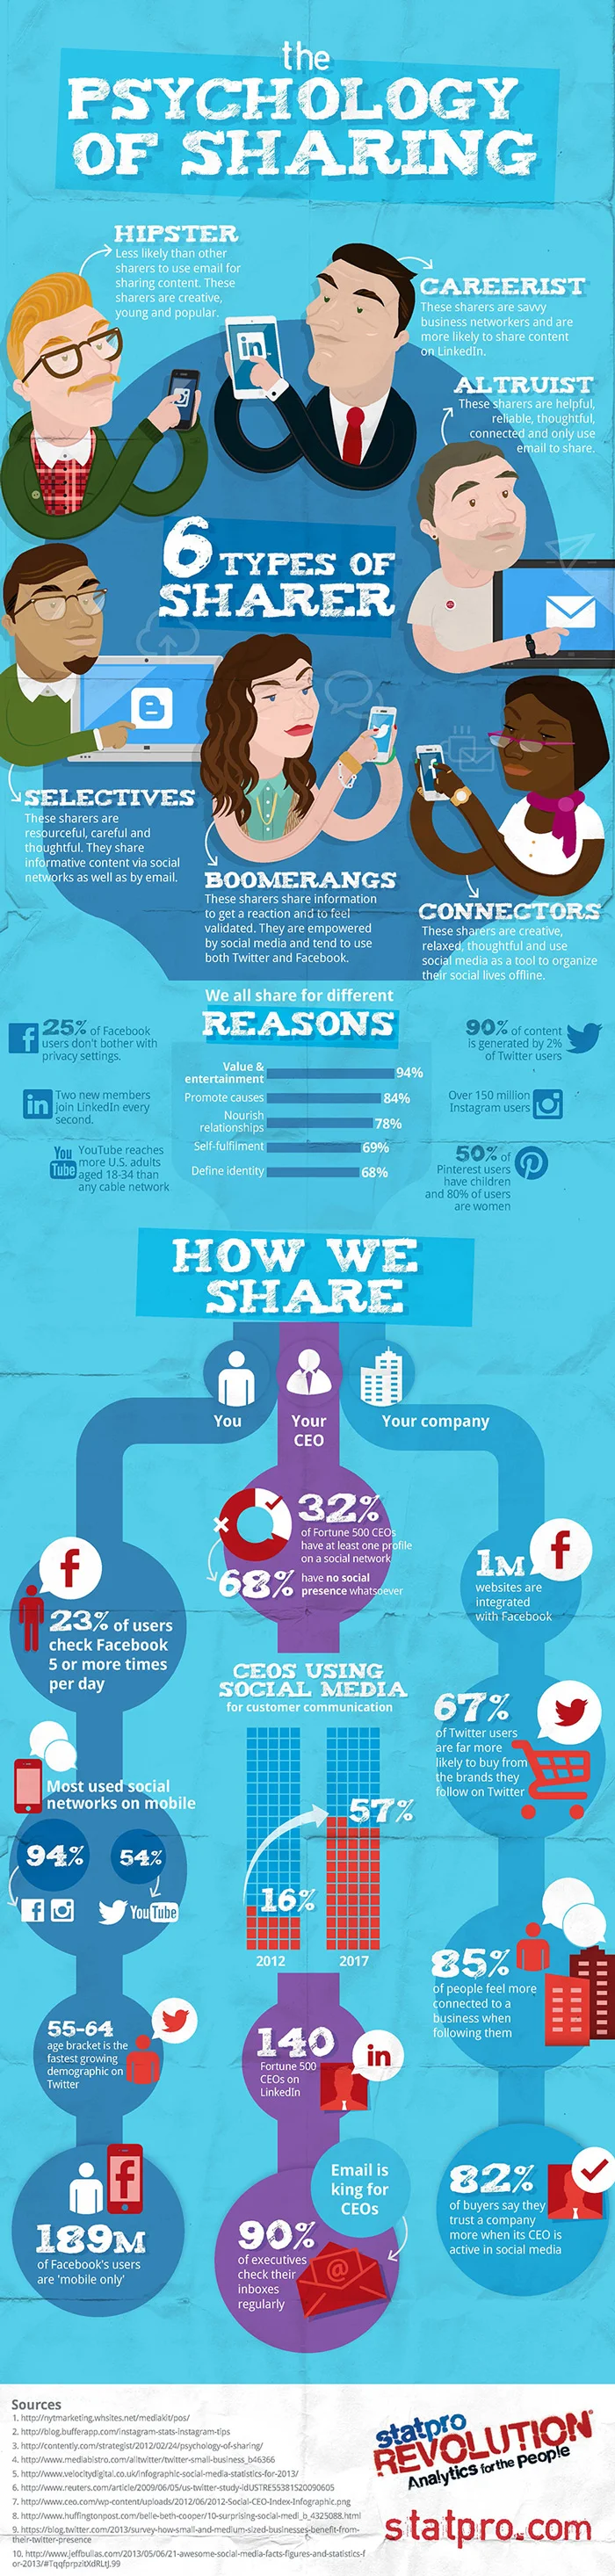 6 types of social media sharers - infographic